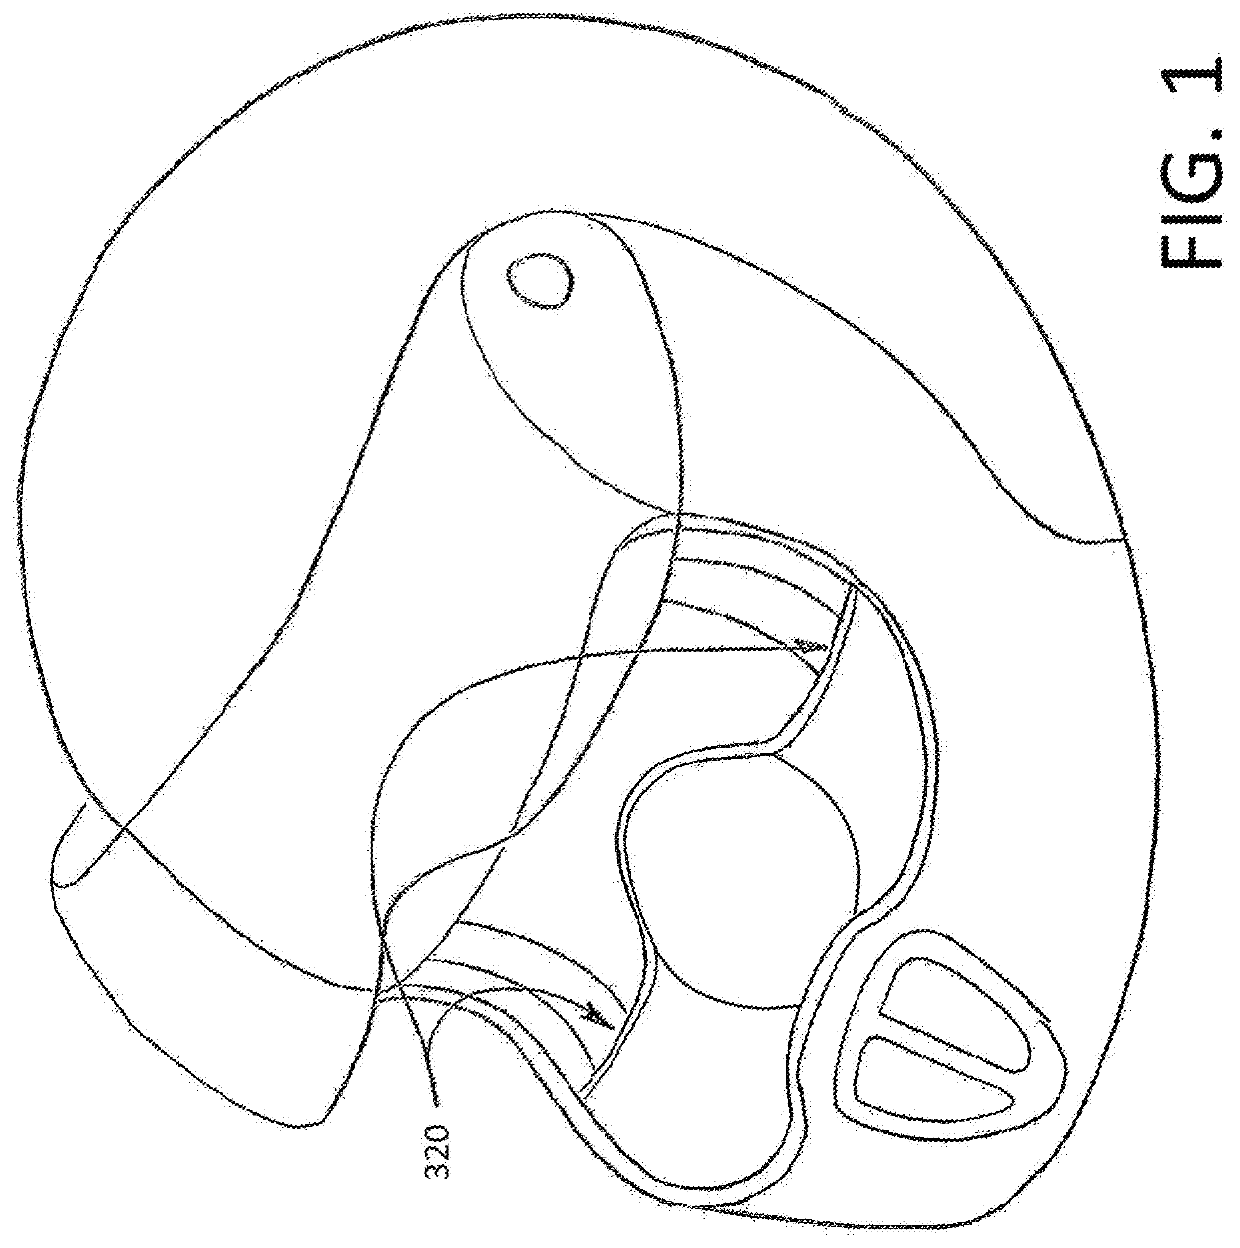 Helmet with cheek pads and method for the use thereof